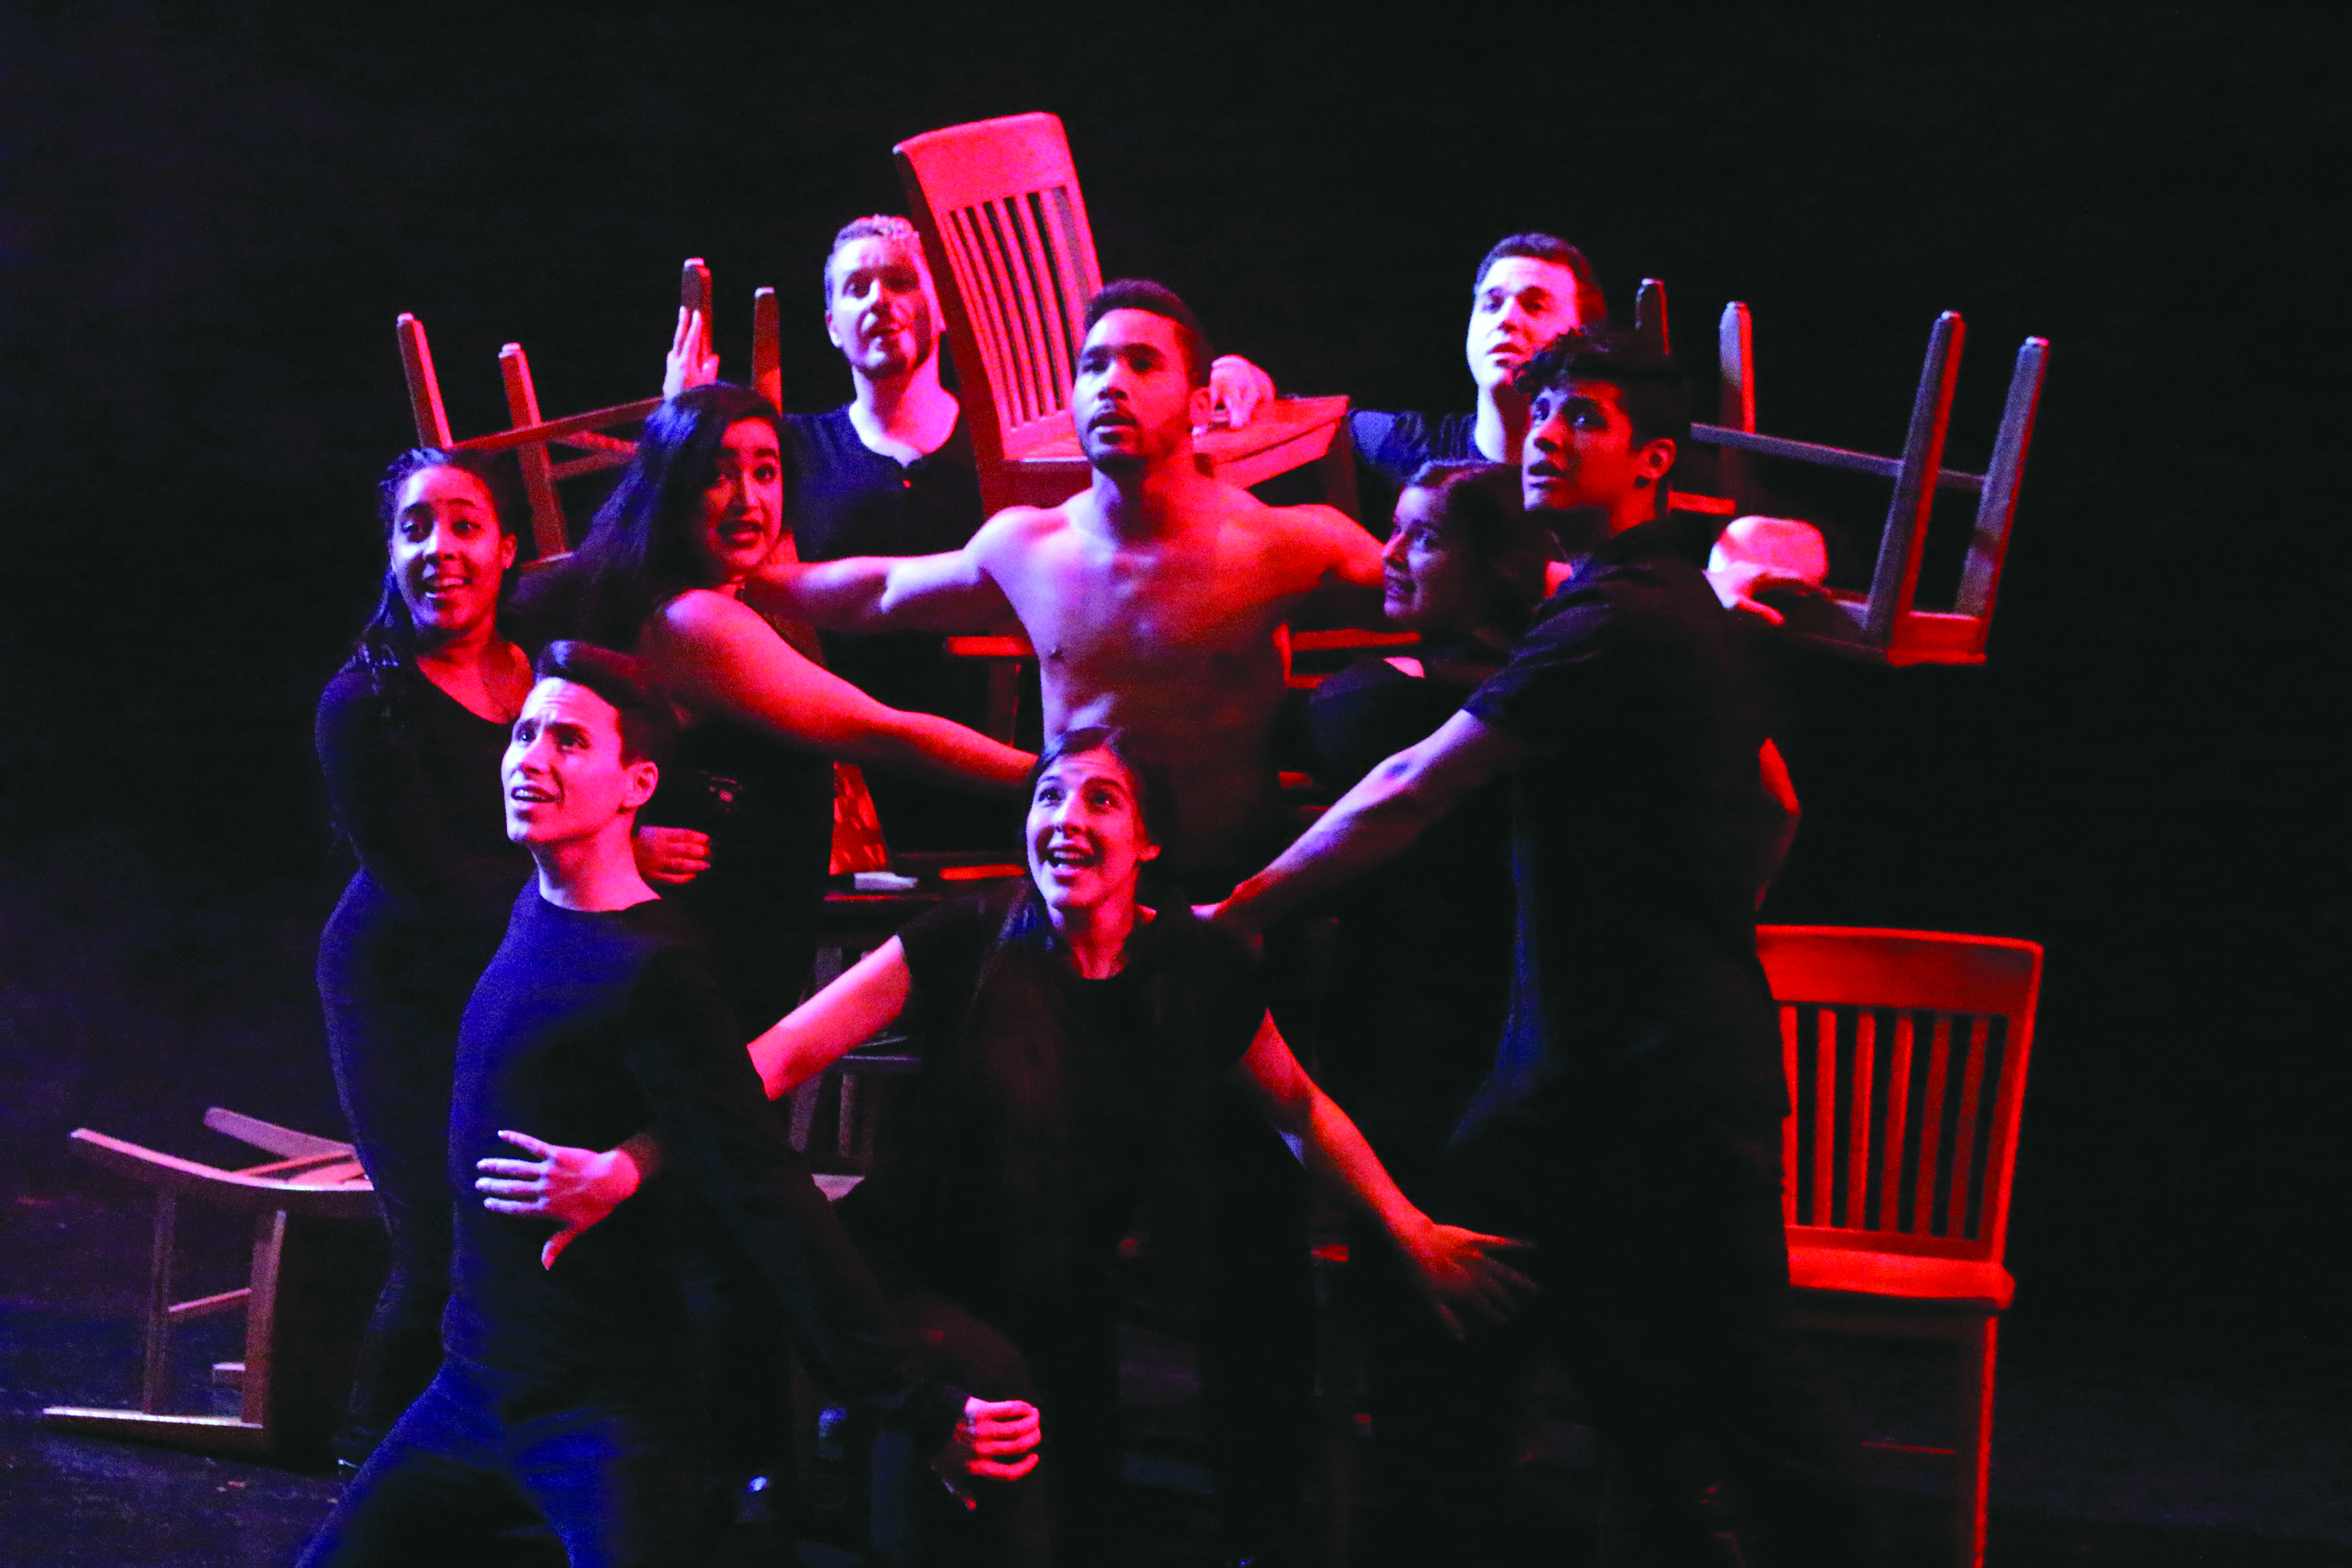 Review: Visual and performing arts delivers compelling performance of “Spring Awakening”